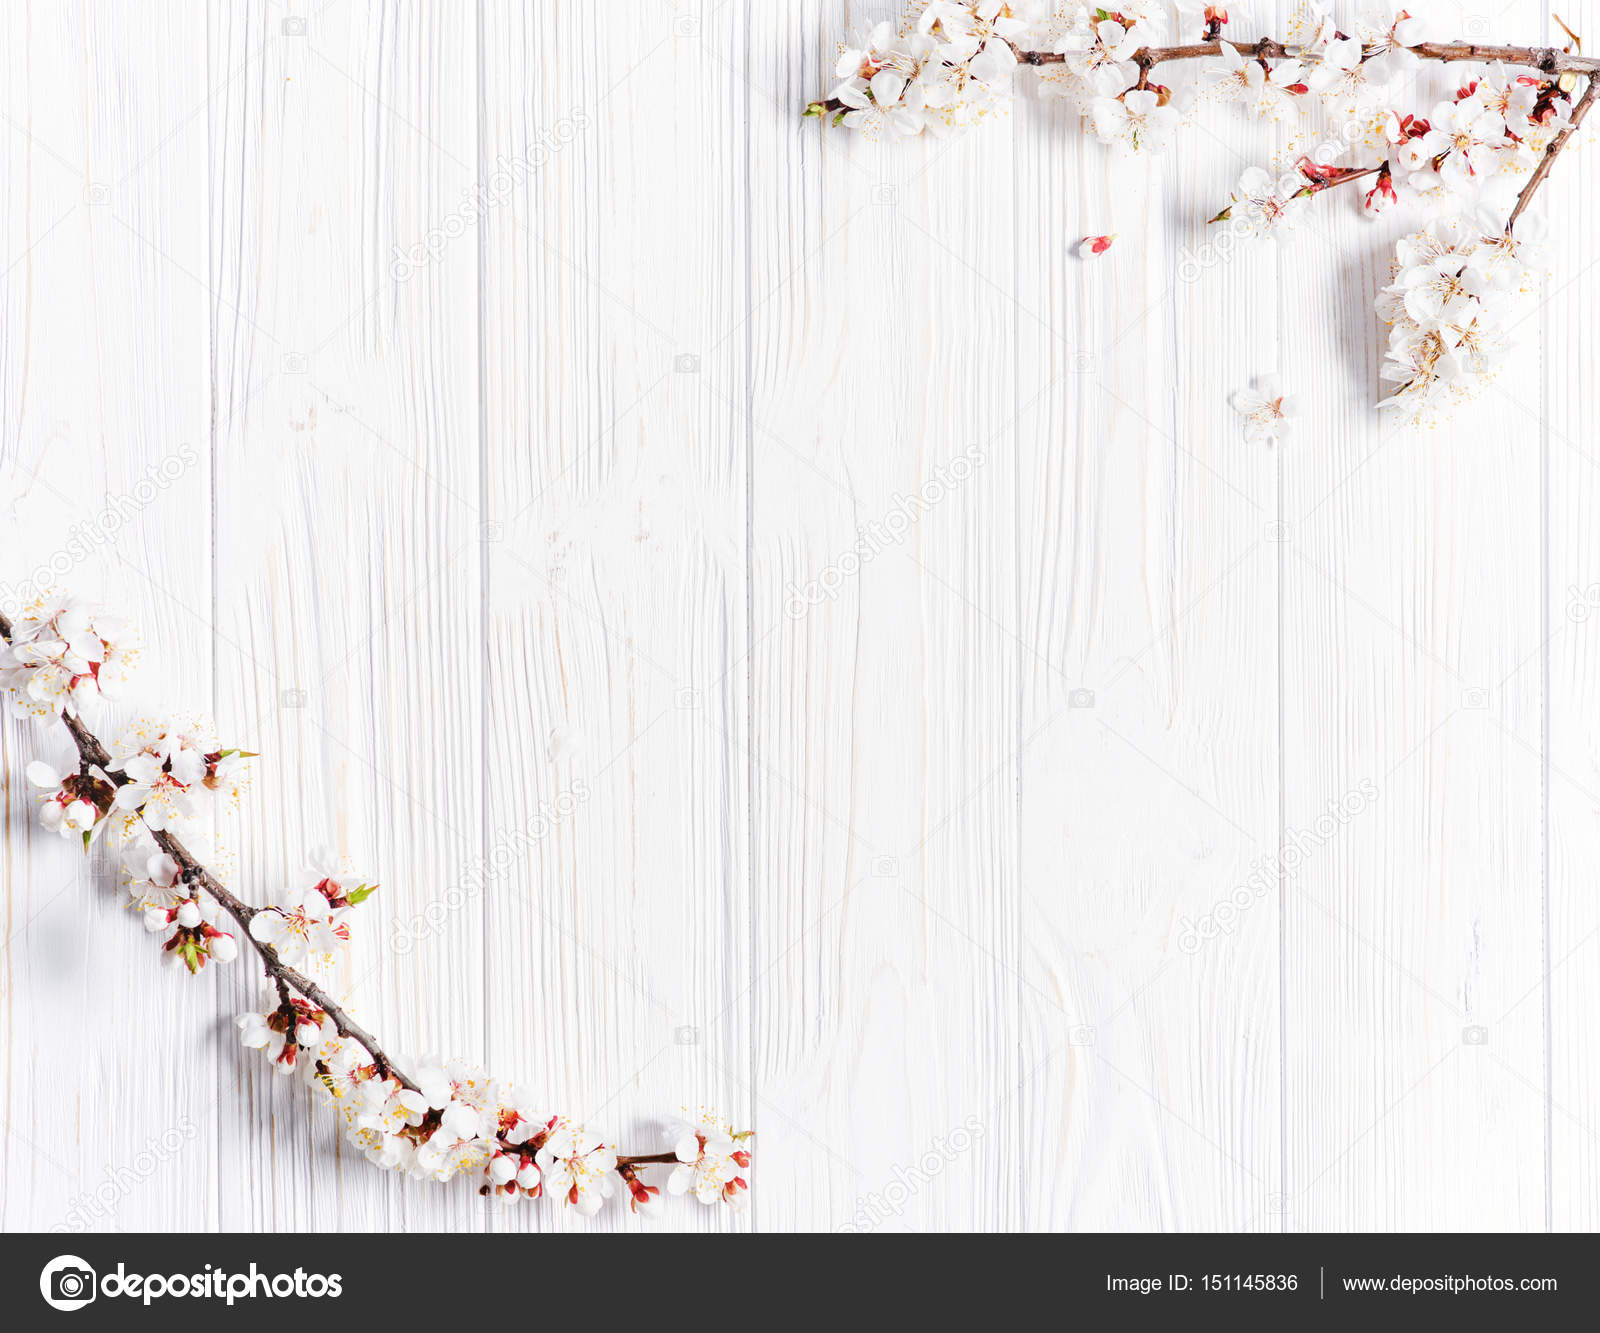 Spring white flowers on vintage wooden background Stock Photo by ©Ablozhka  151145836